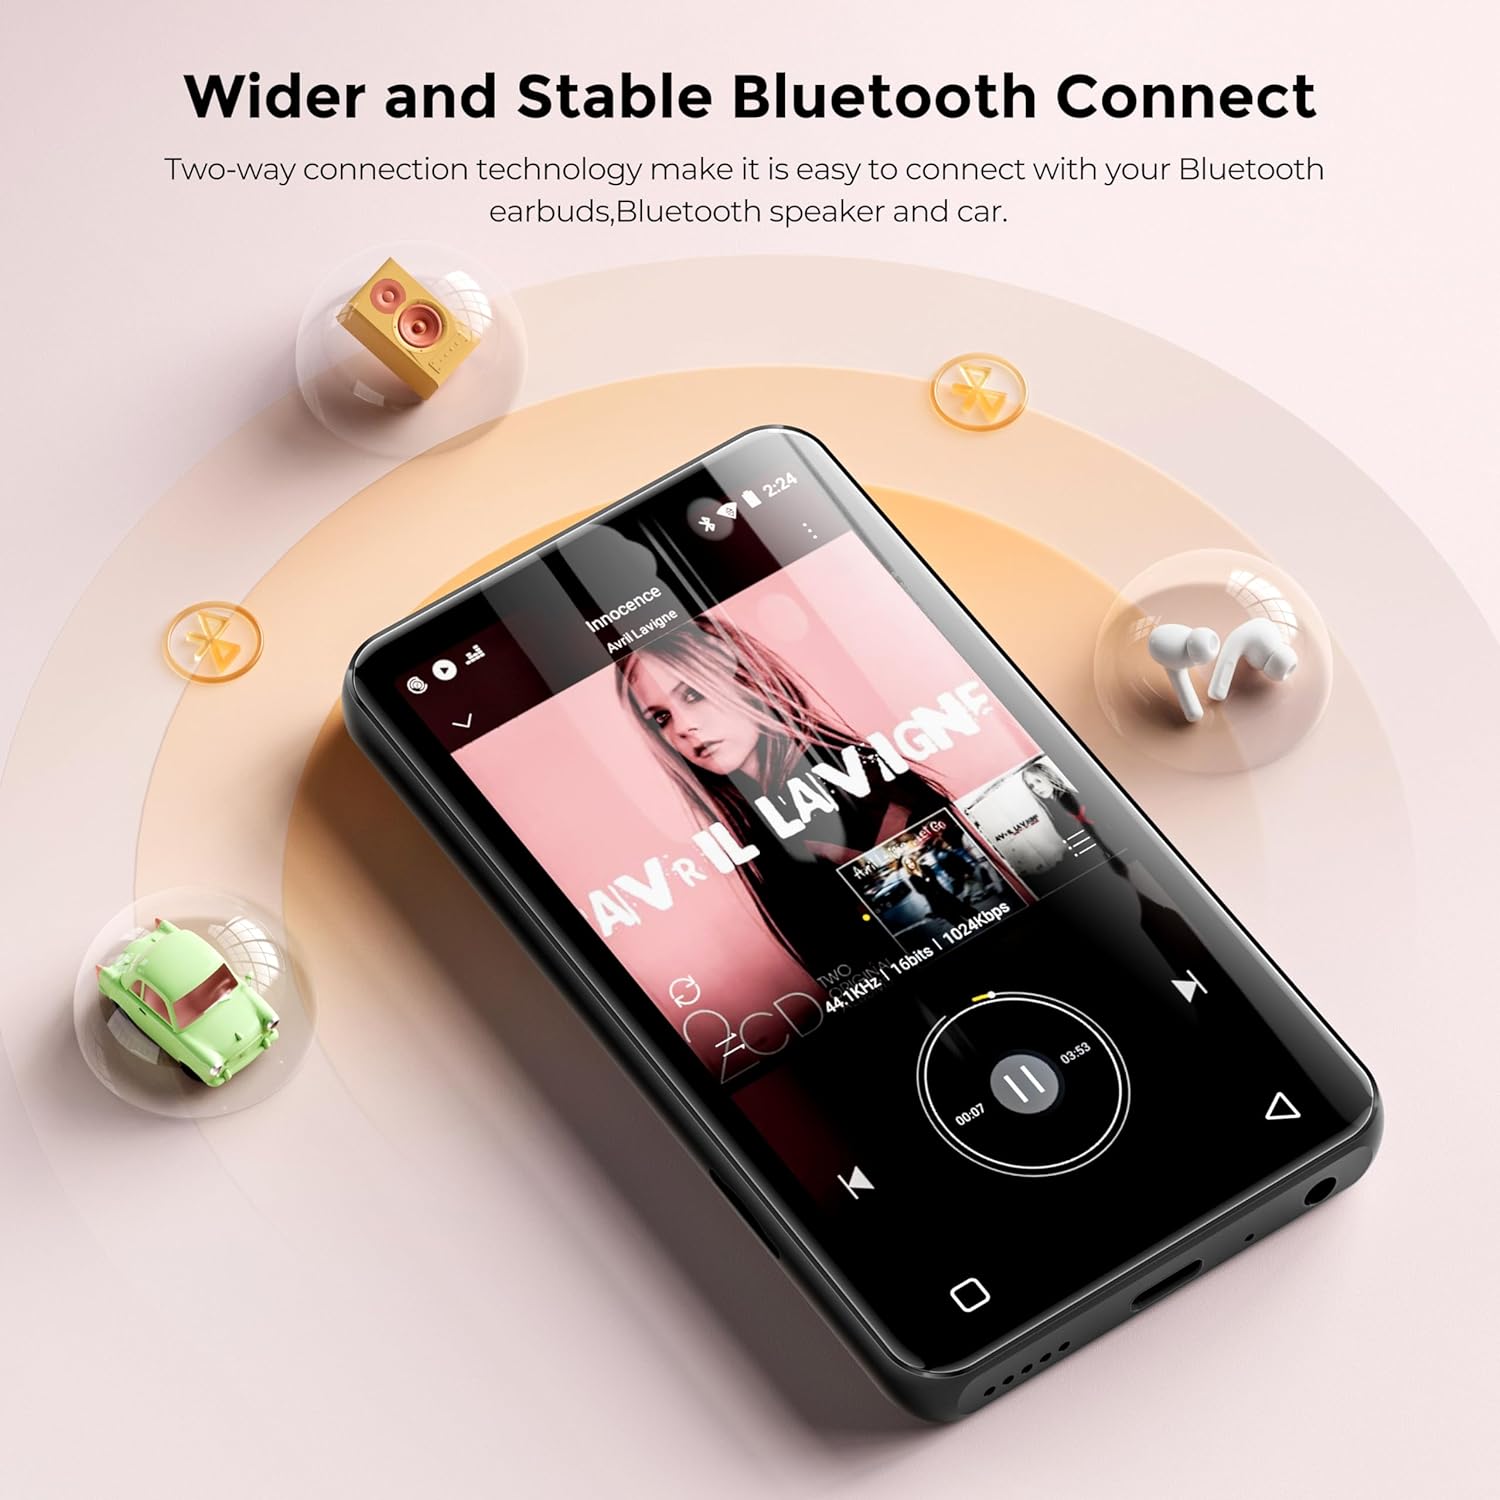 160GB MP3 Player with Bluetooth and WiFi, innioasis Music Player with Spotify,Pandora,Amazon Music,4" Touch Screen Android MP4 MP3 Player for Kids